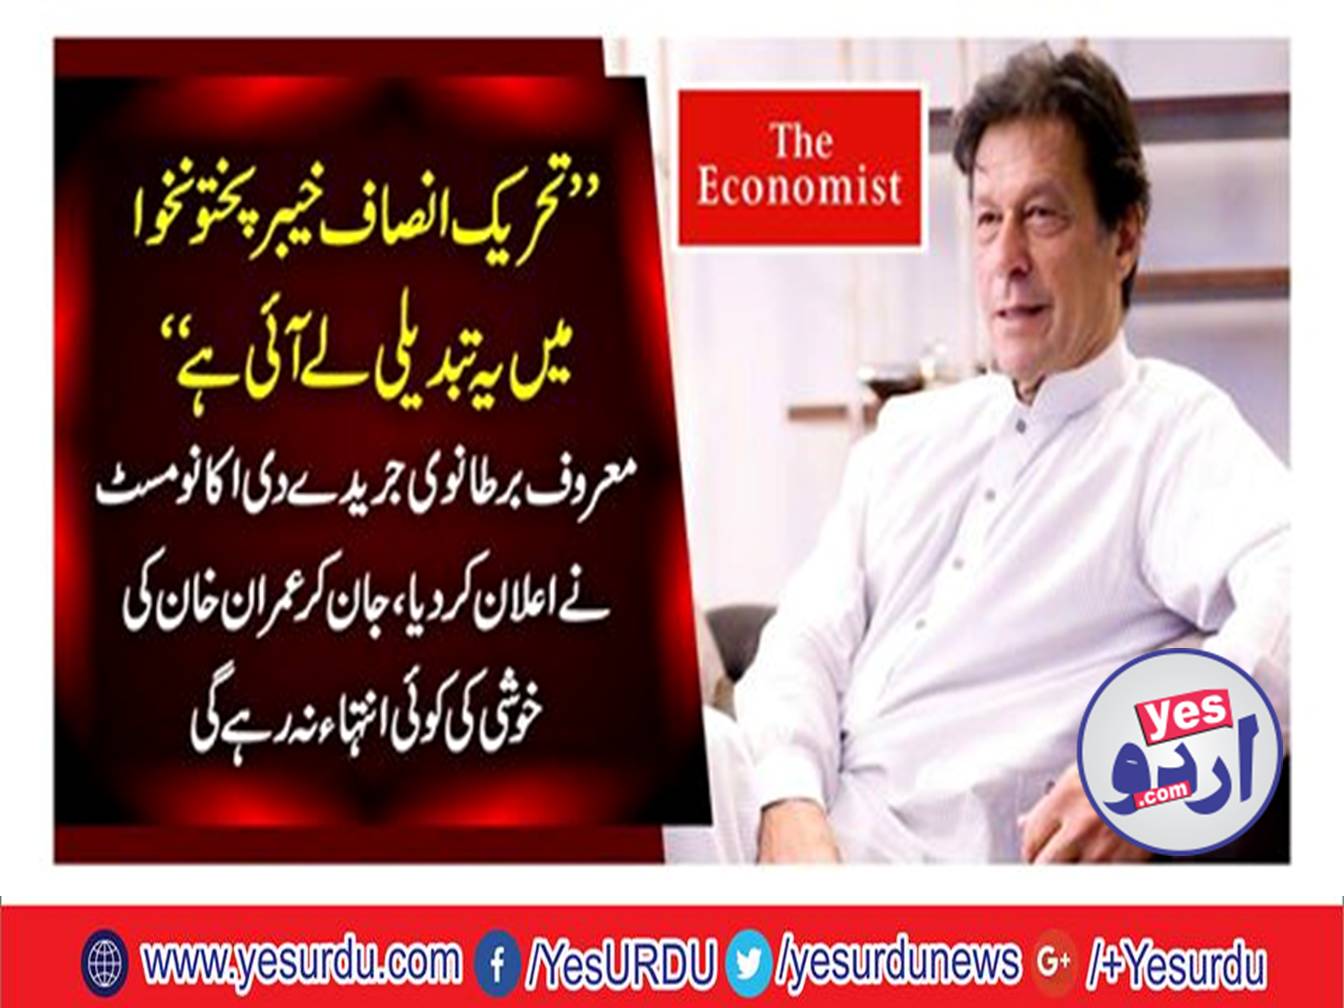 "This change took place in Tehreek-e-Insaf Khyber Pakhtunkhwa "the famous British journalist the Economist announced